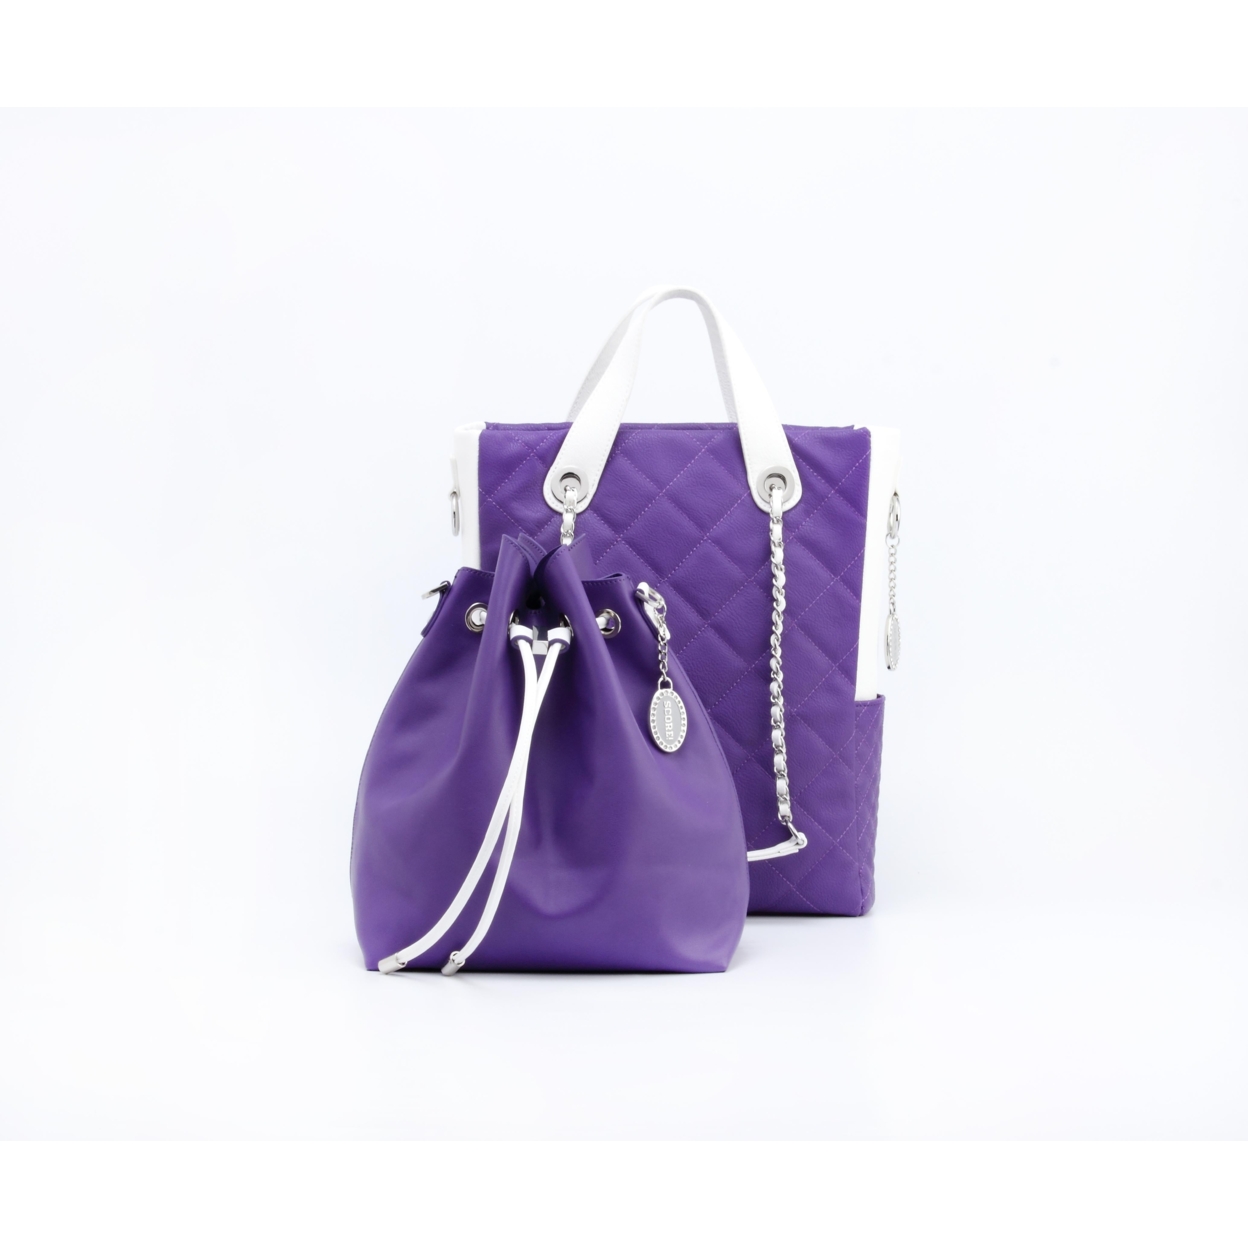 SCORE!'s Kat Travel Tote For Business, Work, Or School Quilted Shoulder Bag - Purple And White